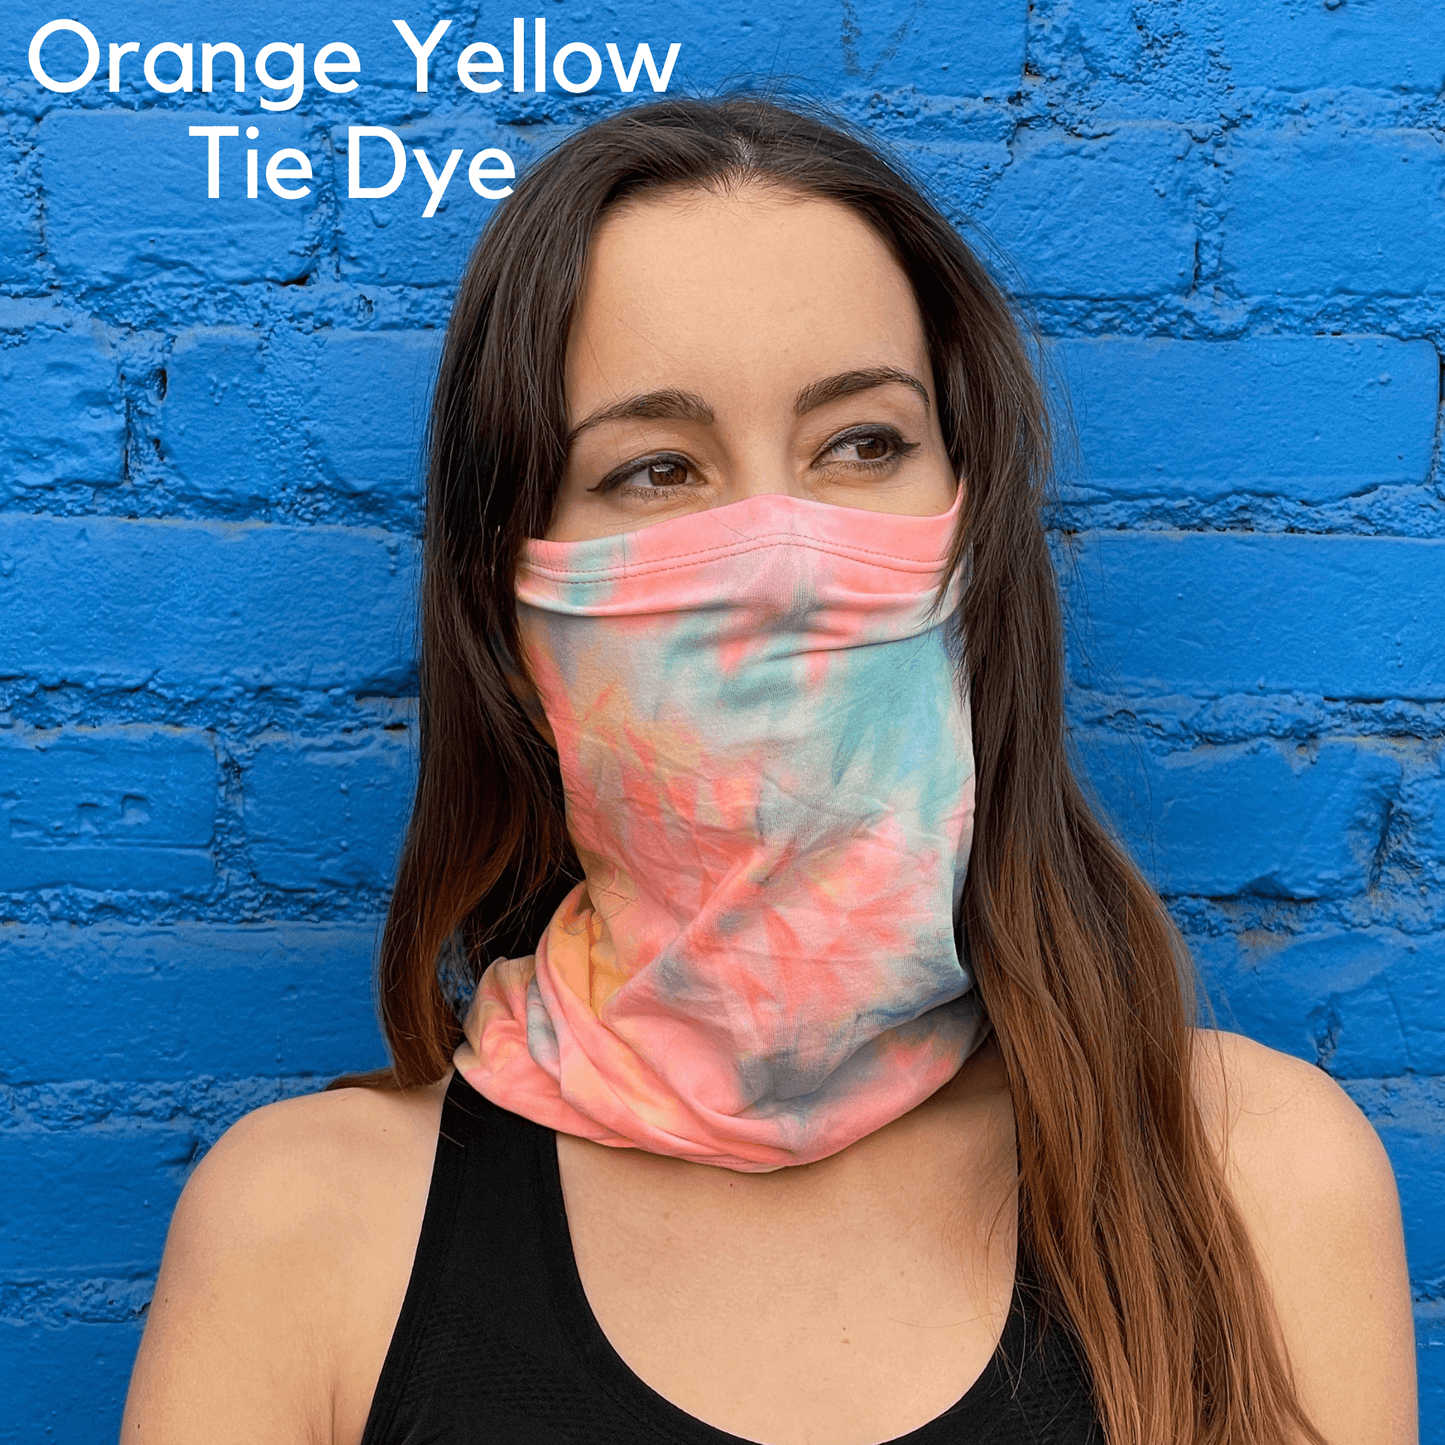 Sports Neck Gaiter Face Mask for Outdoor Activities